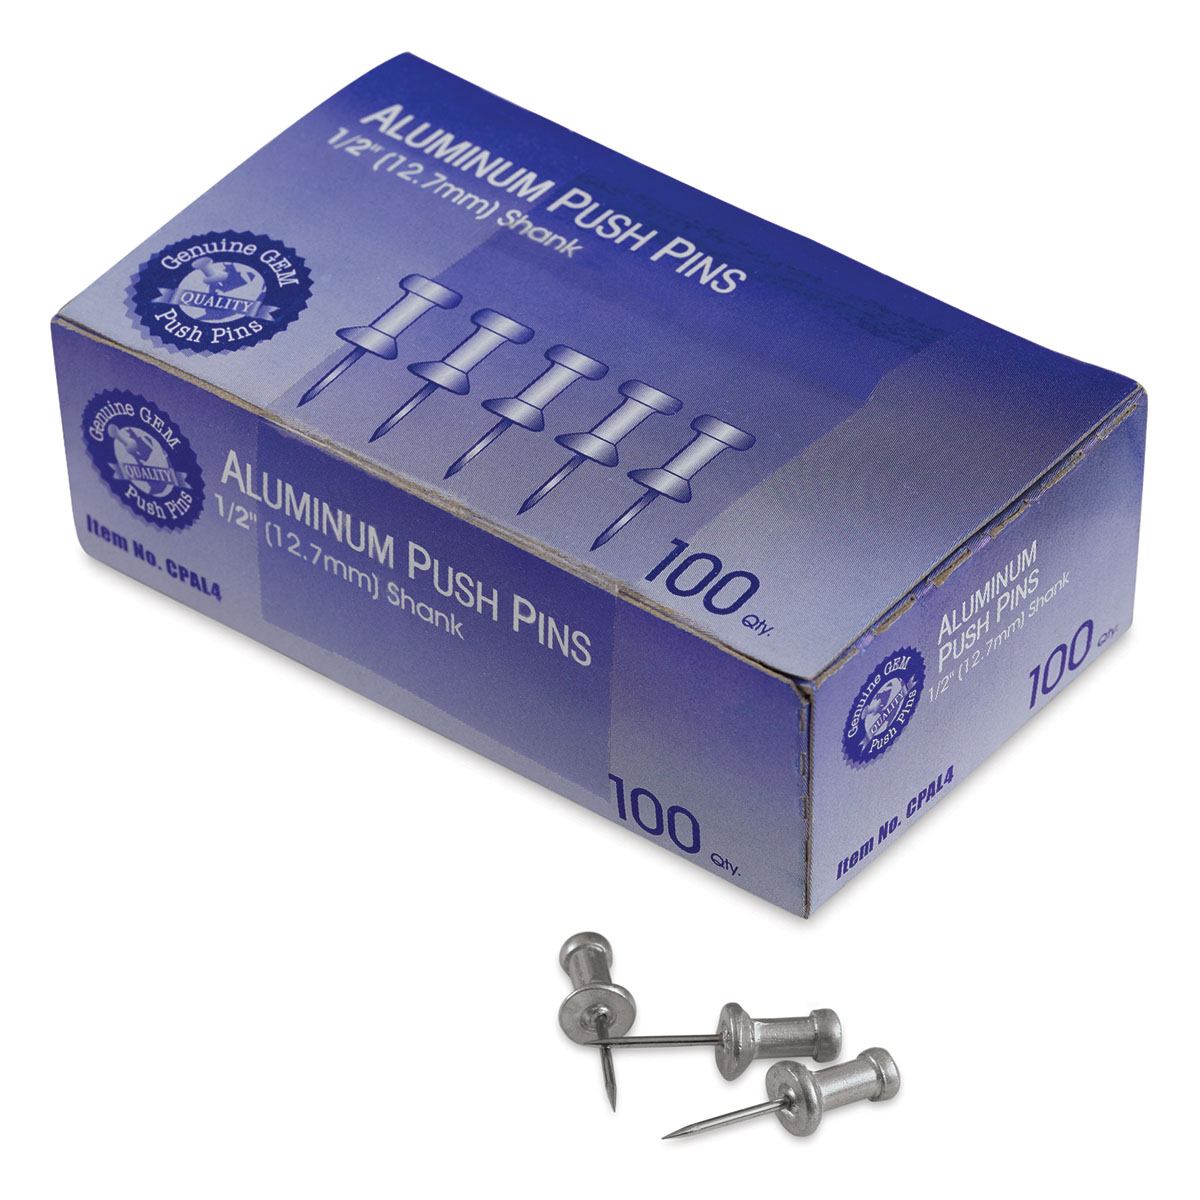  ADVANTUS Aluminum Head Push Pins, Steel 5/8-Inch Point,  Silver, 100 per Box (CPAL5) : Tacks And Pushpins : Office Products